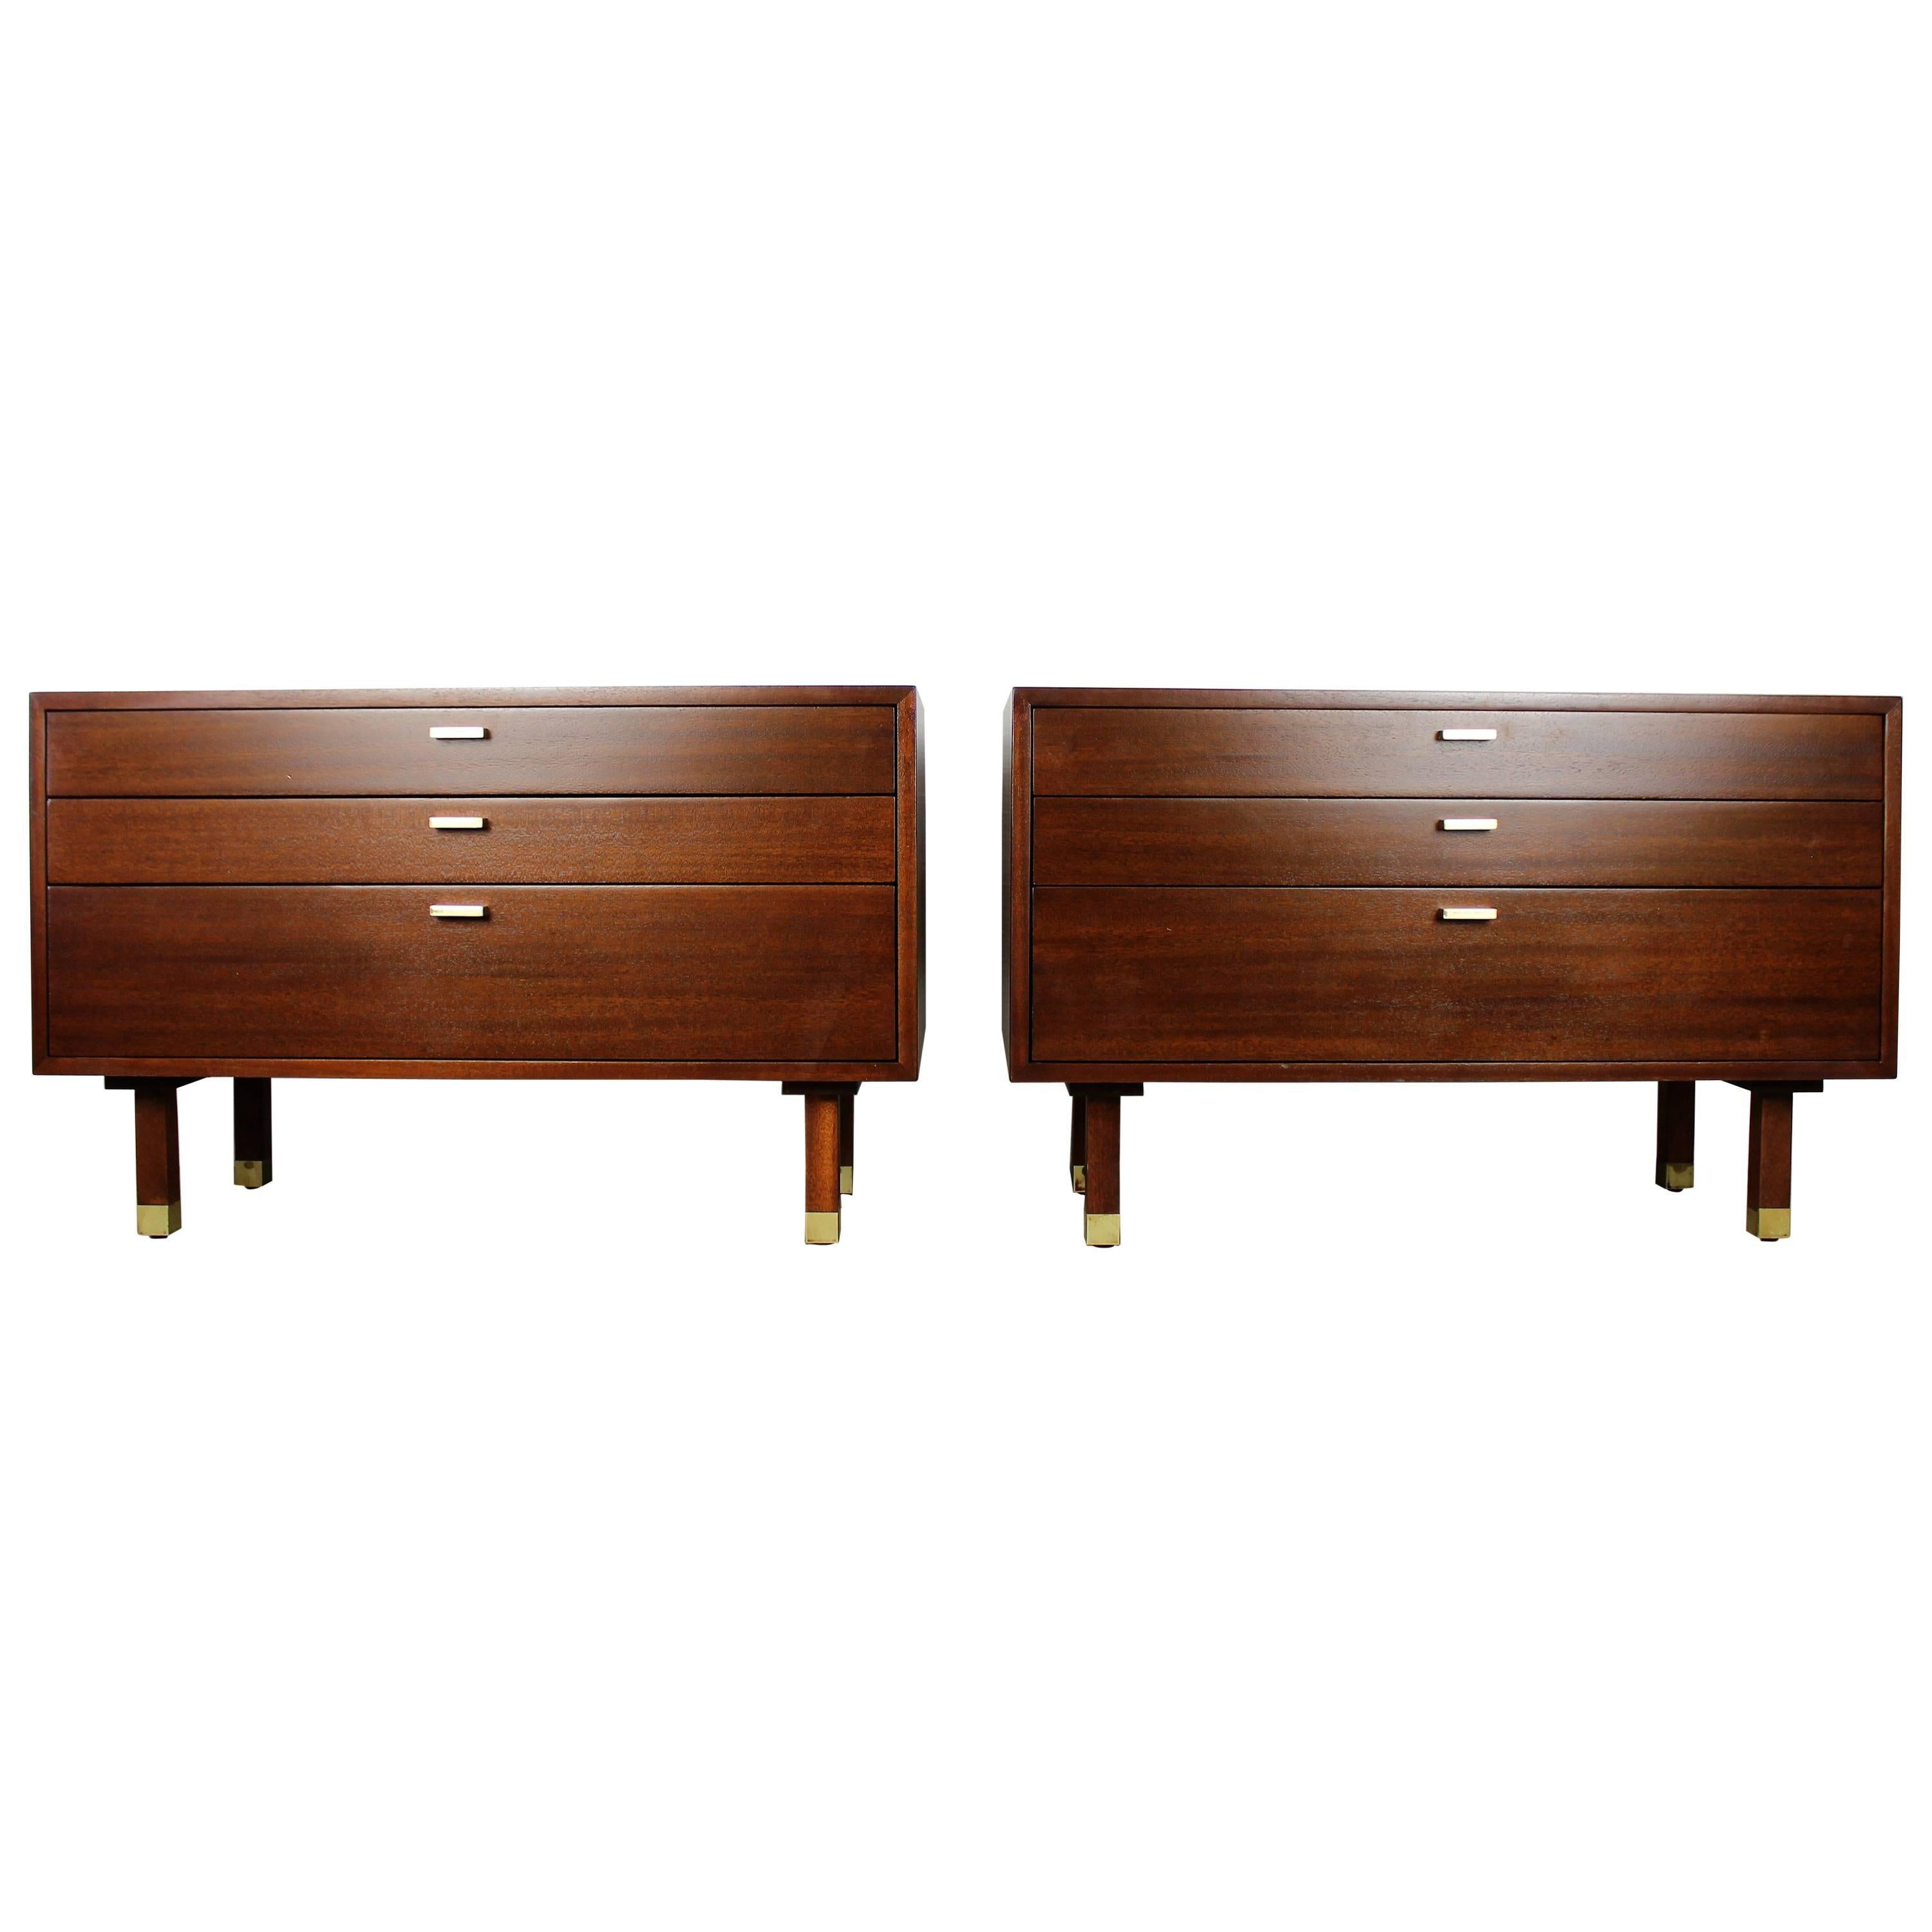 Large Mahogany Harvey Probber Nightstands with Brass Detail, 1960s